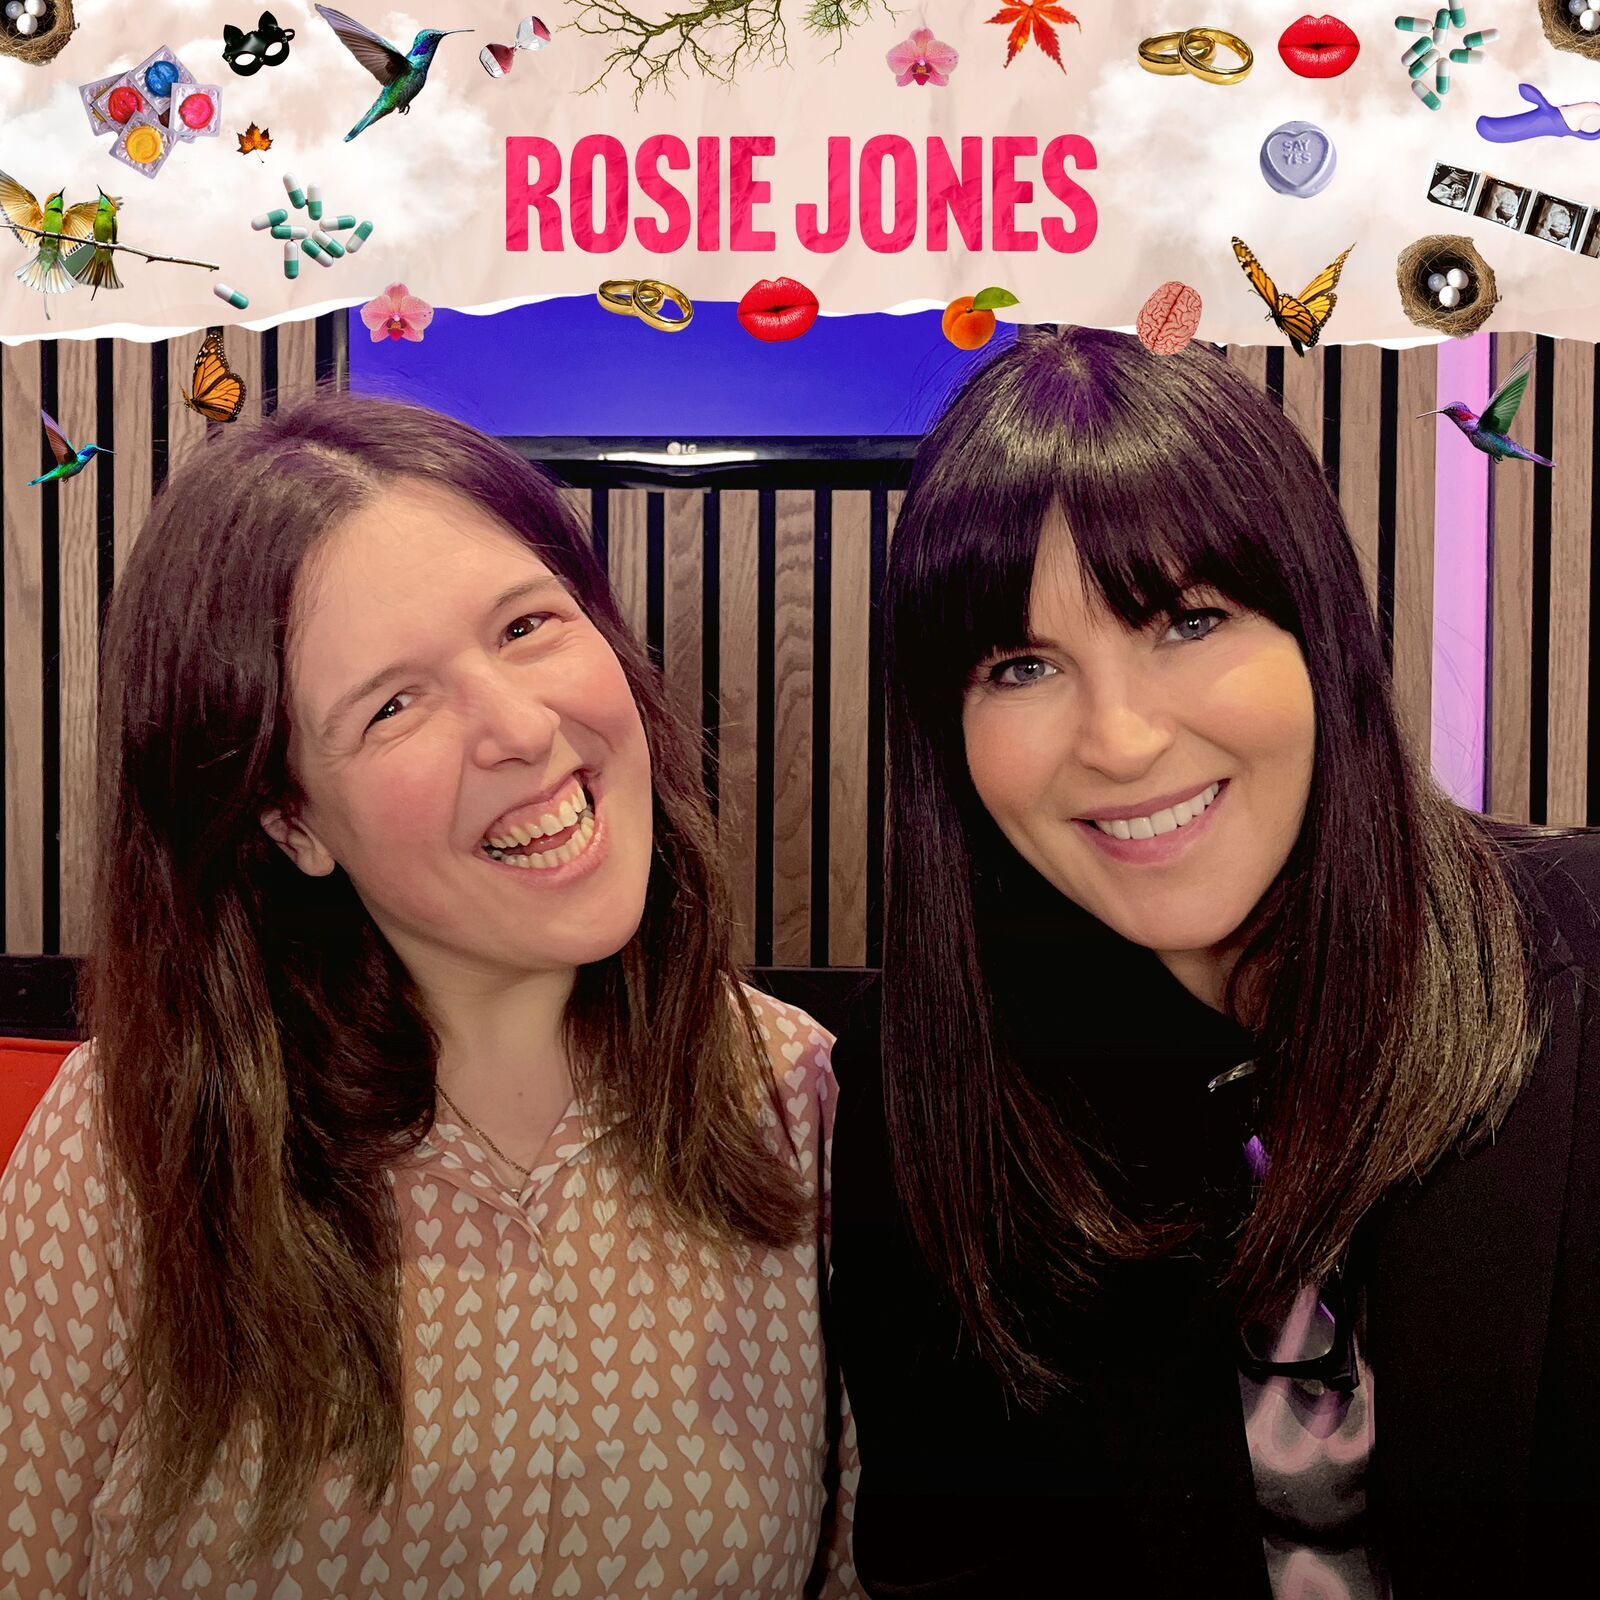 3: Disability on my dating profile? With Rosie Jones